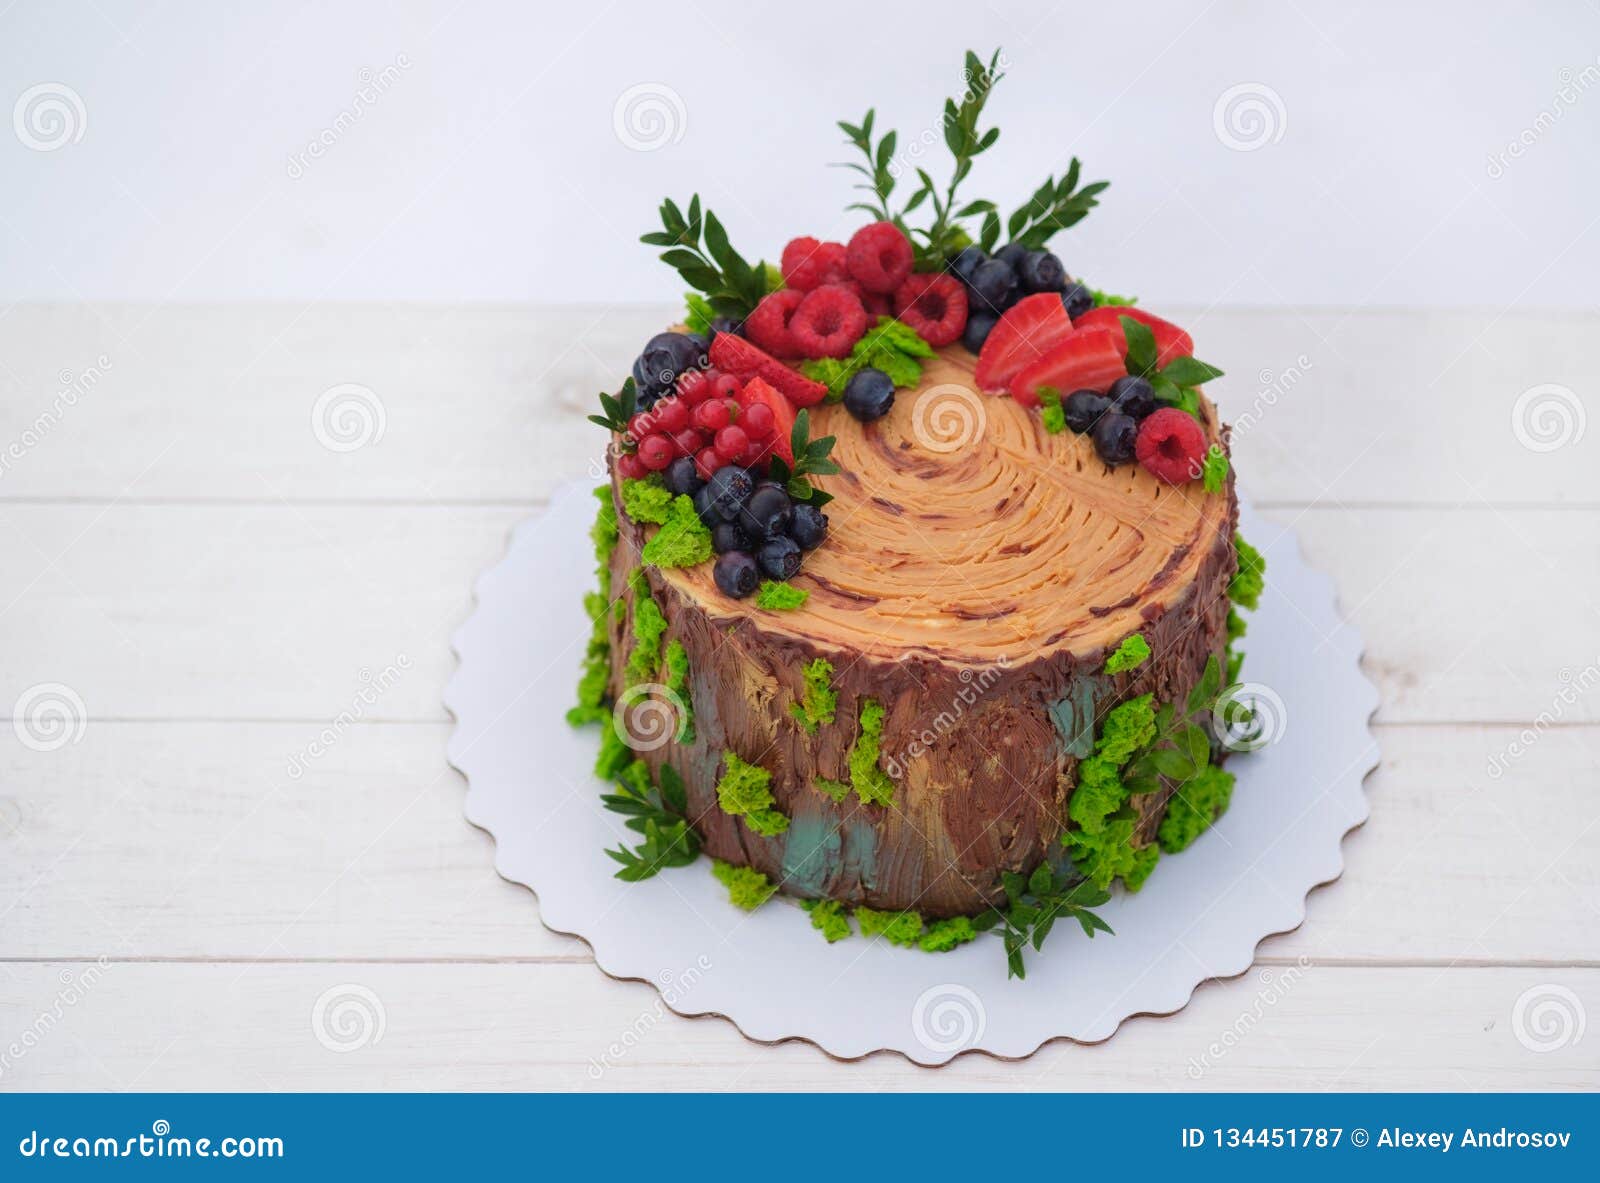 Homemade Cake in the Form of a Forest Old Tree Stump with Berries ...